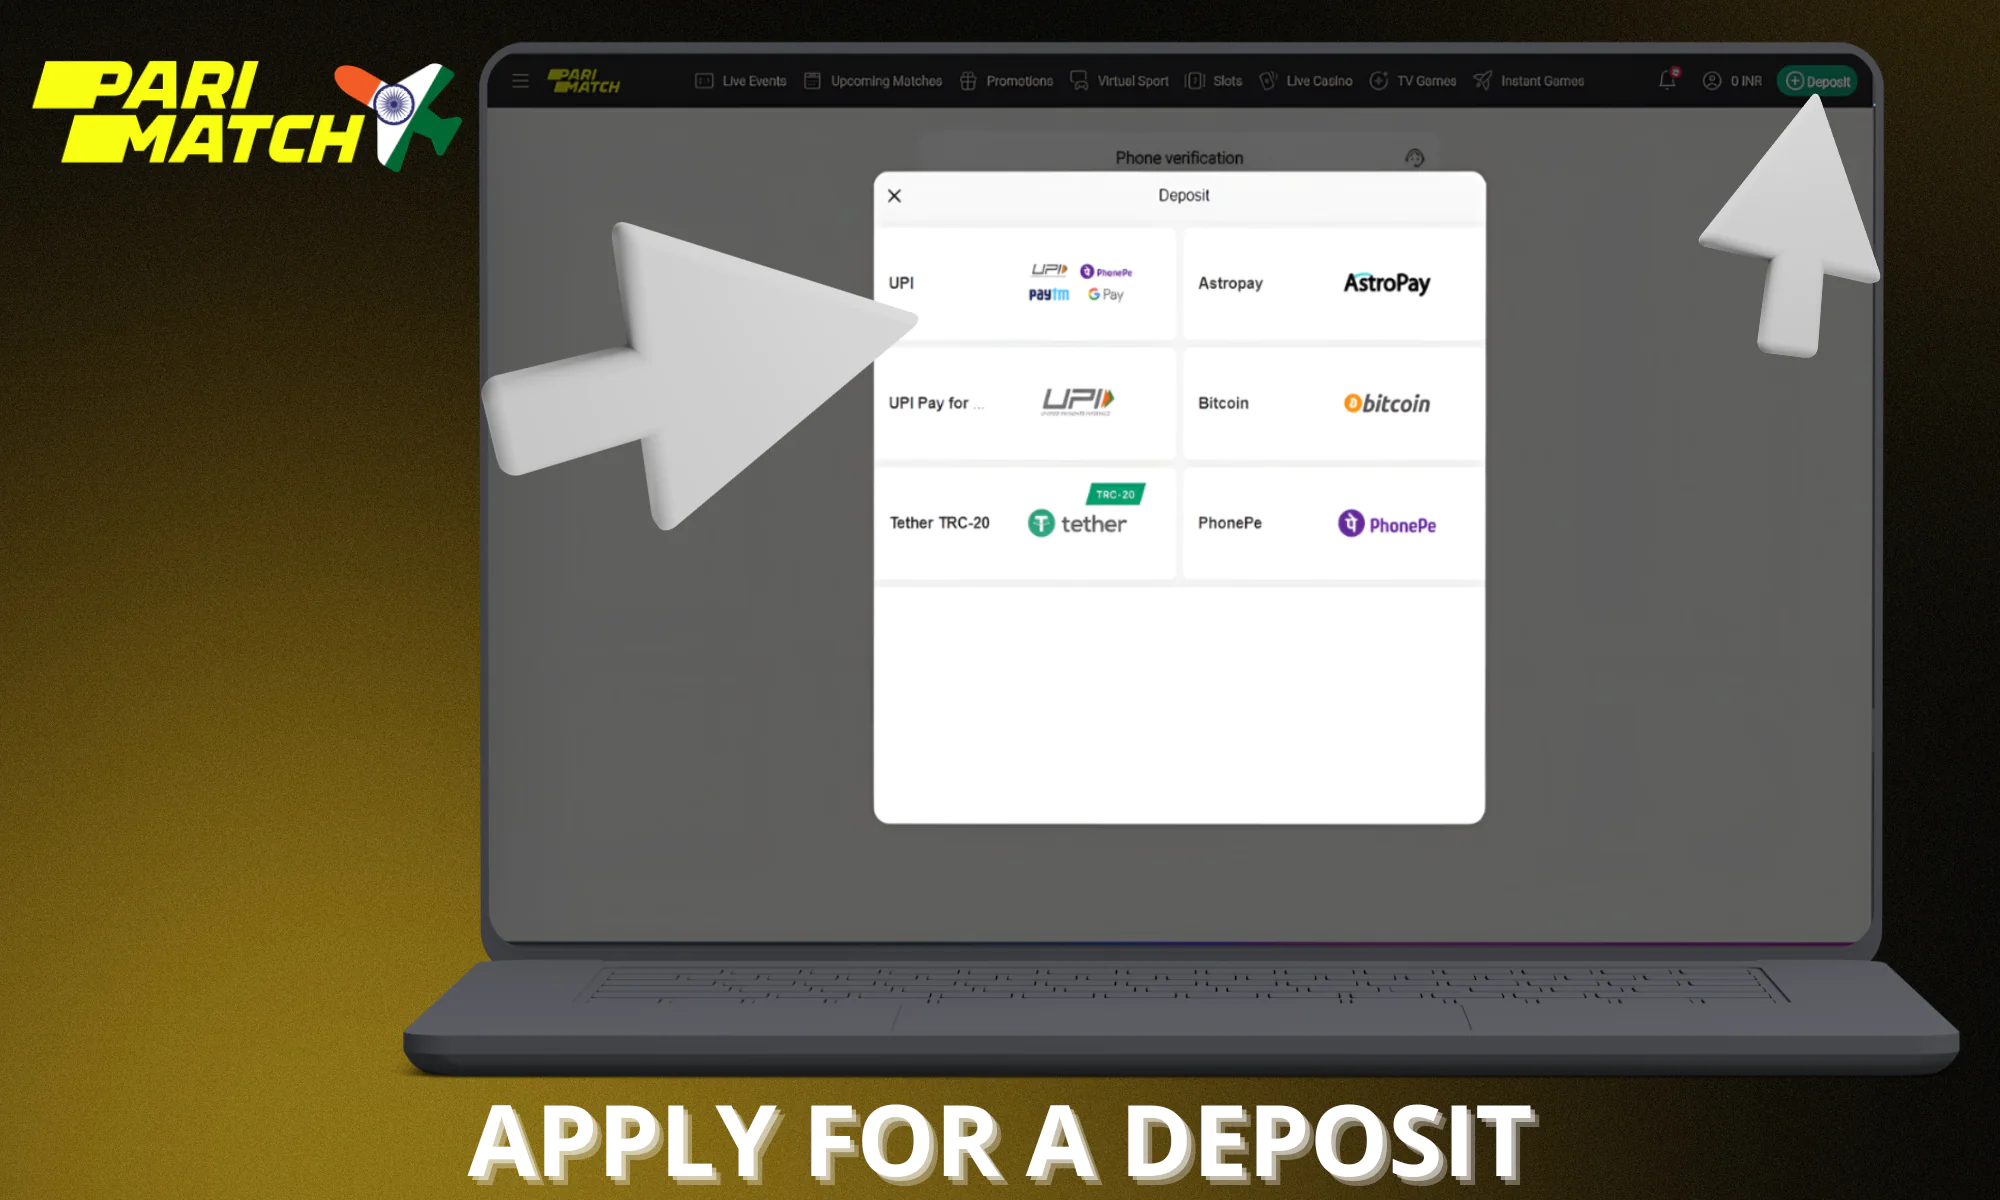 Next, make a deposit to your account